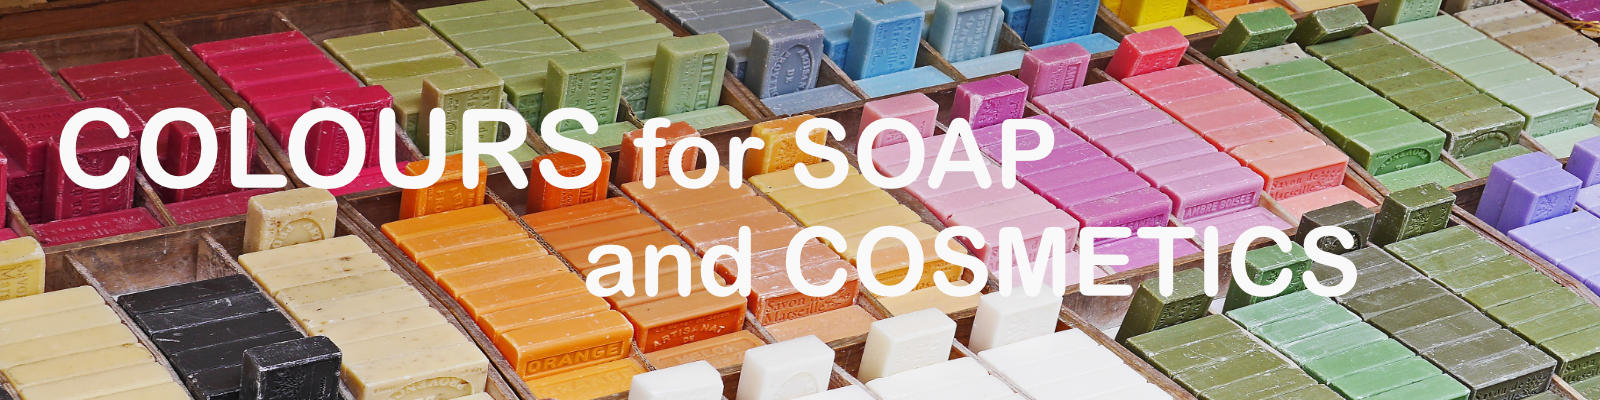 colours for soap and cosmetics